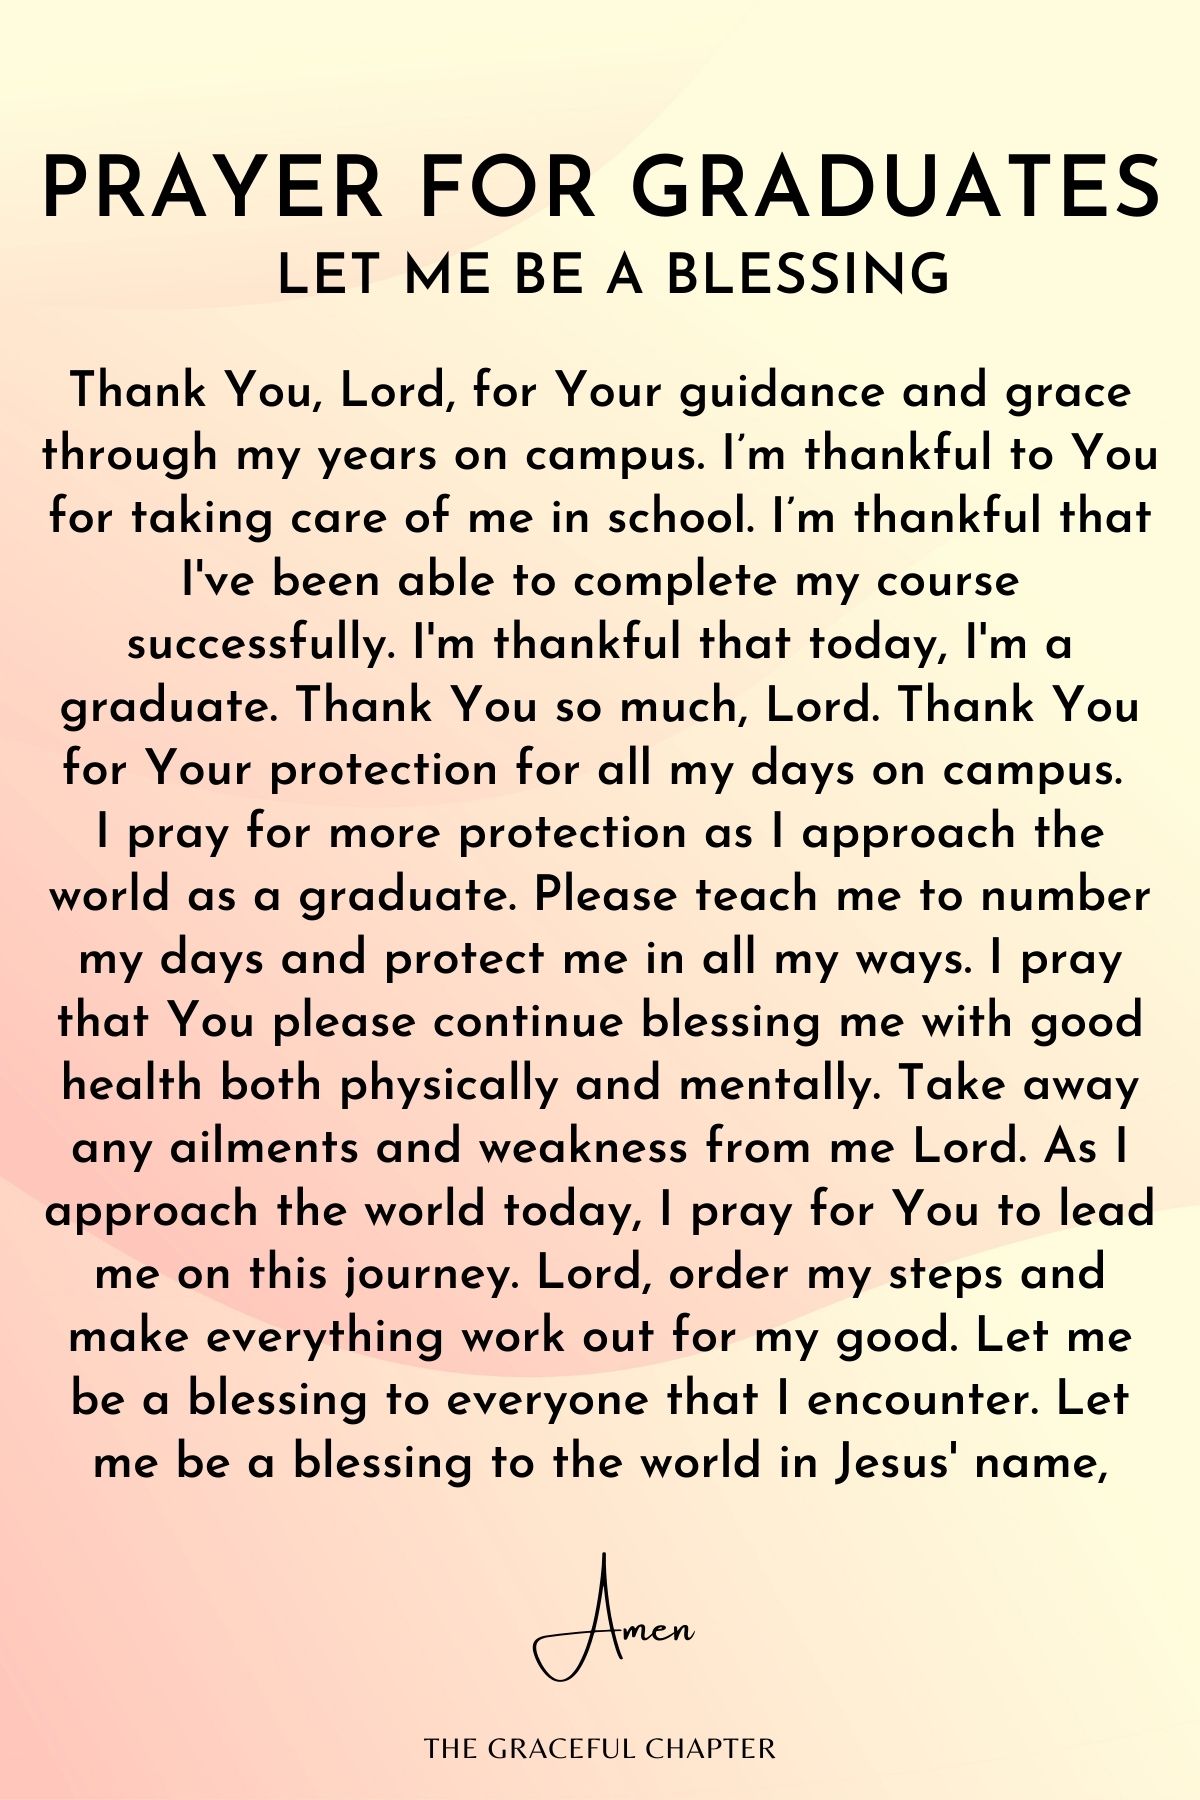  Let me be a blessing - Prayers for Graduates